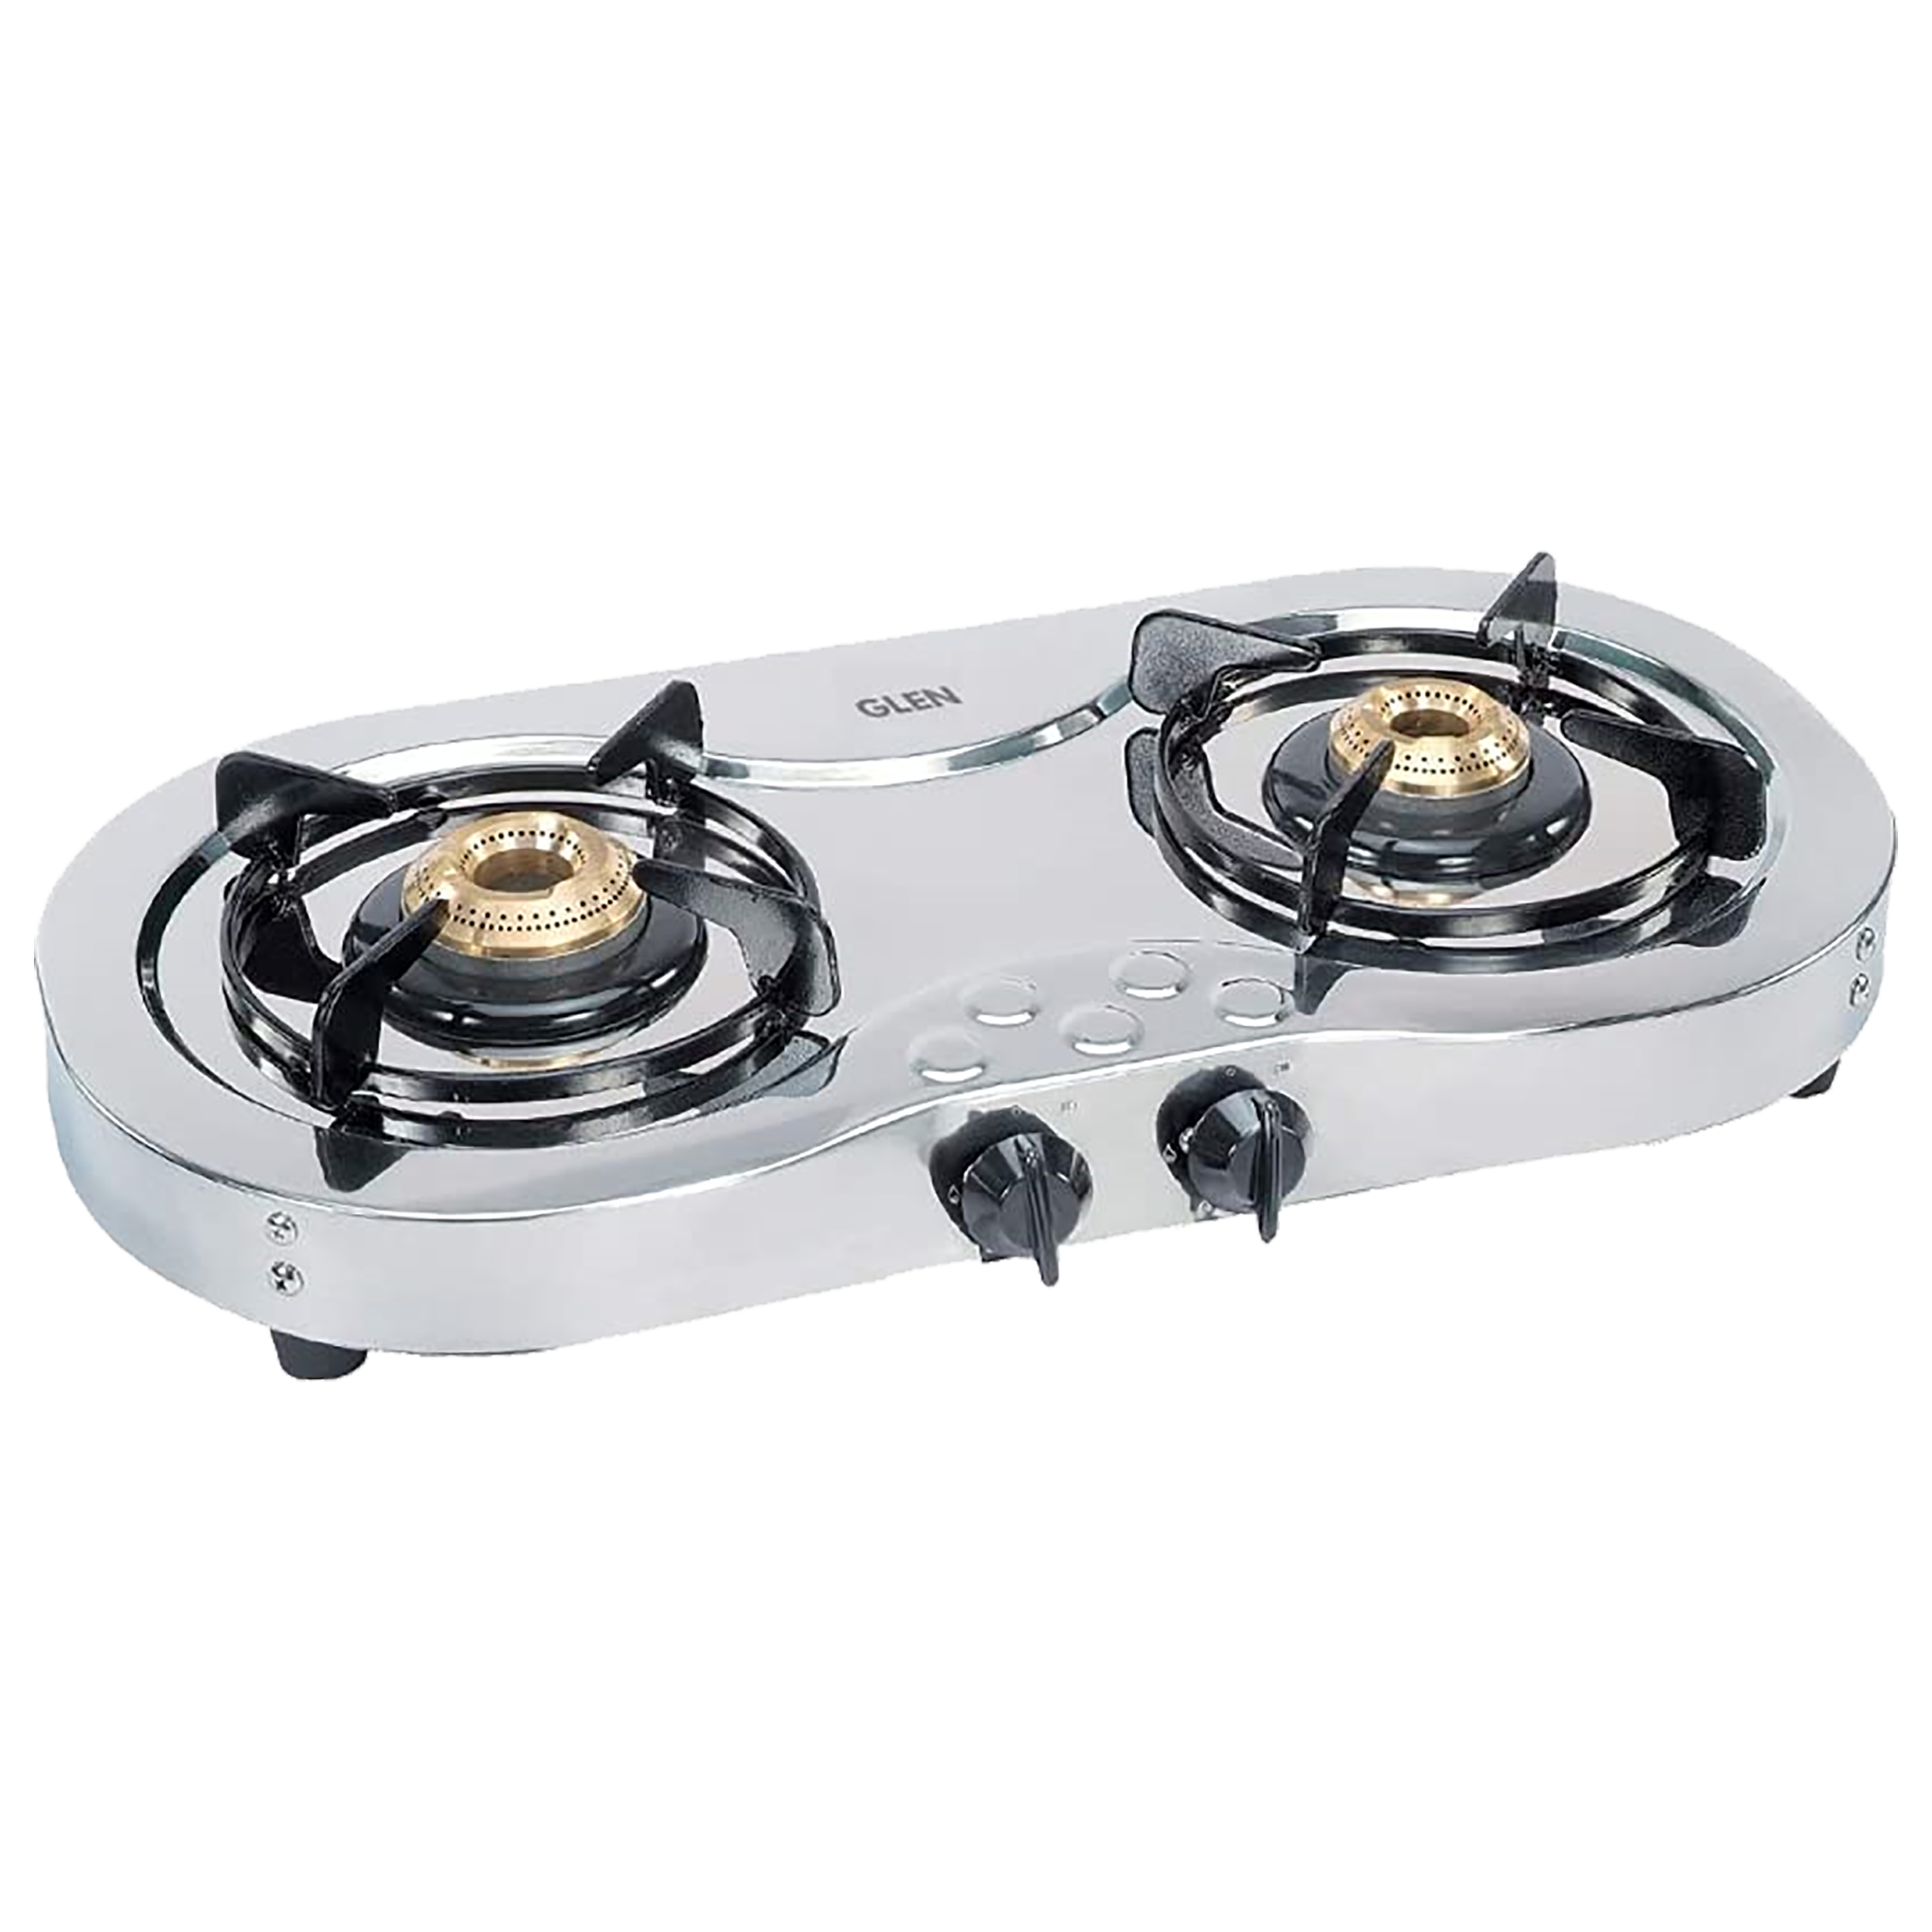 Glen CT1025SS 2 Burner Stainless Steel Gas Stove (Maximum Cooking Space, Silver)_1